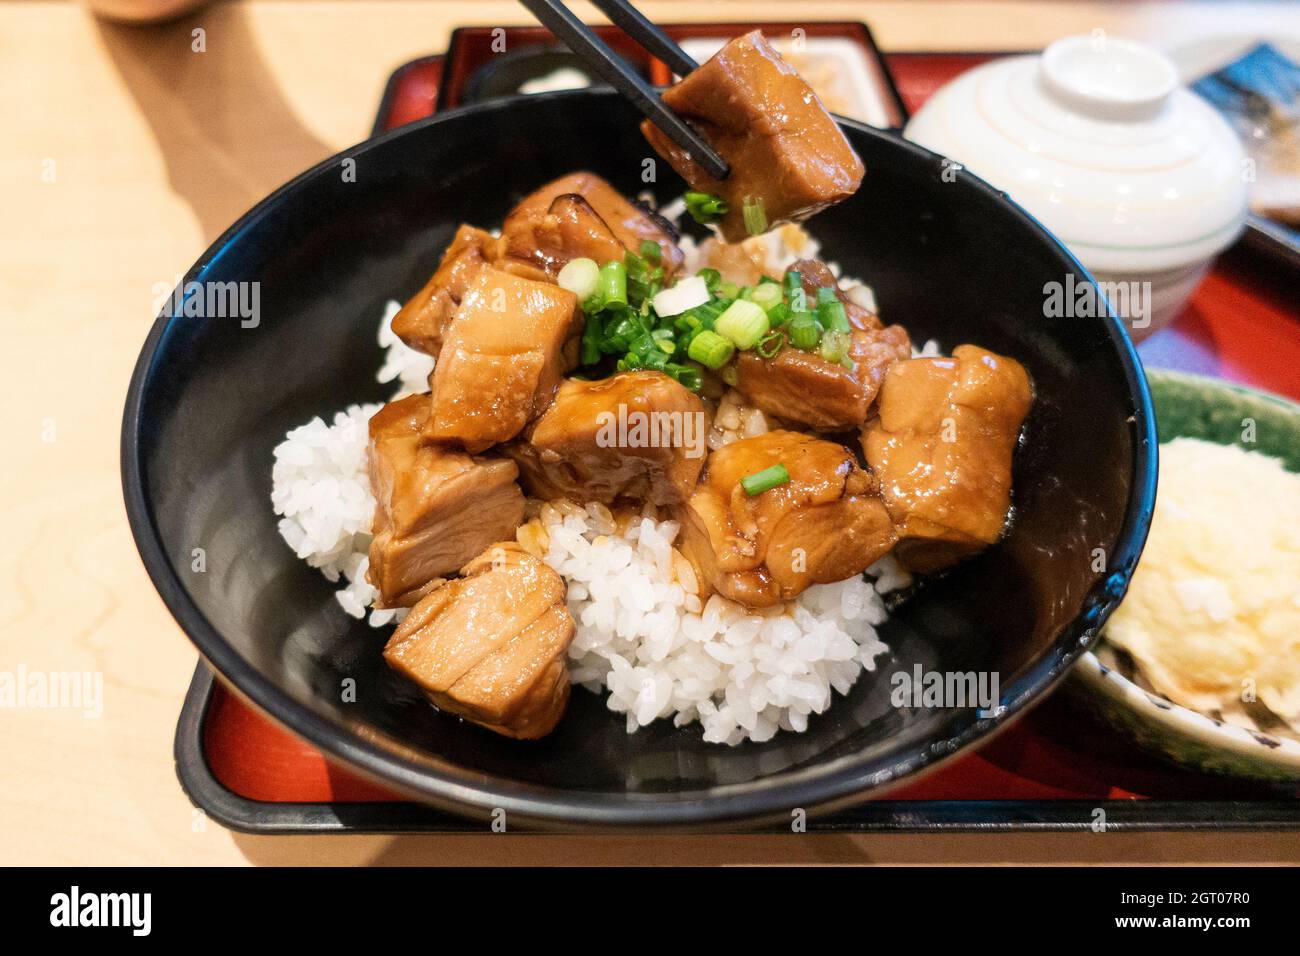 High Angle View Of Food In Bowl Stock Photo